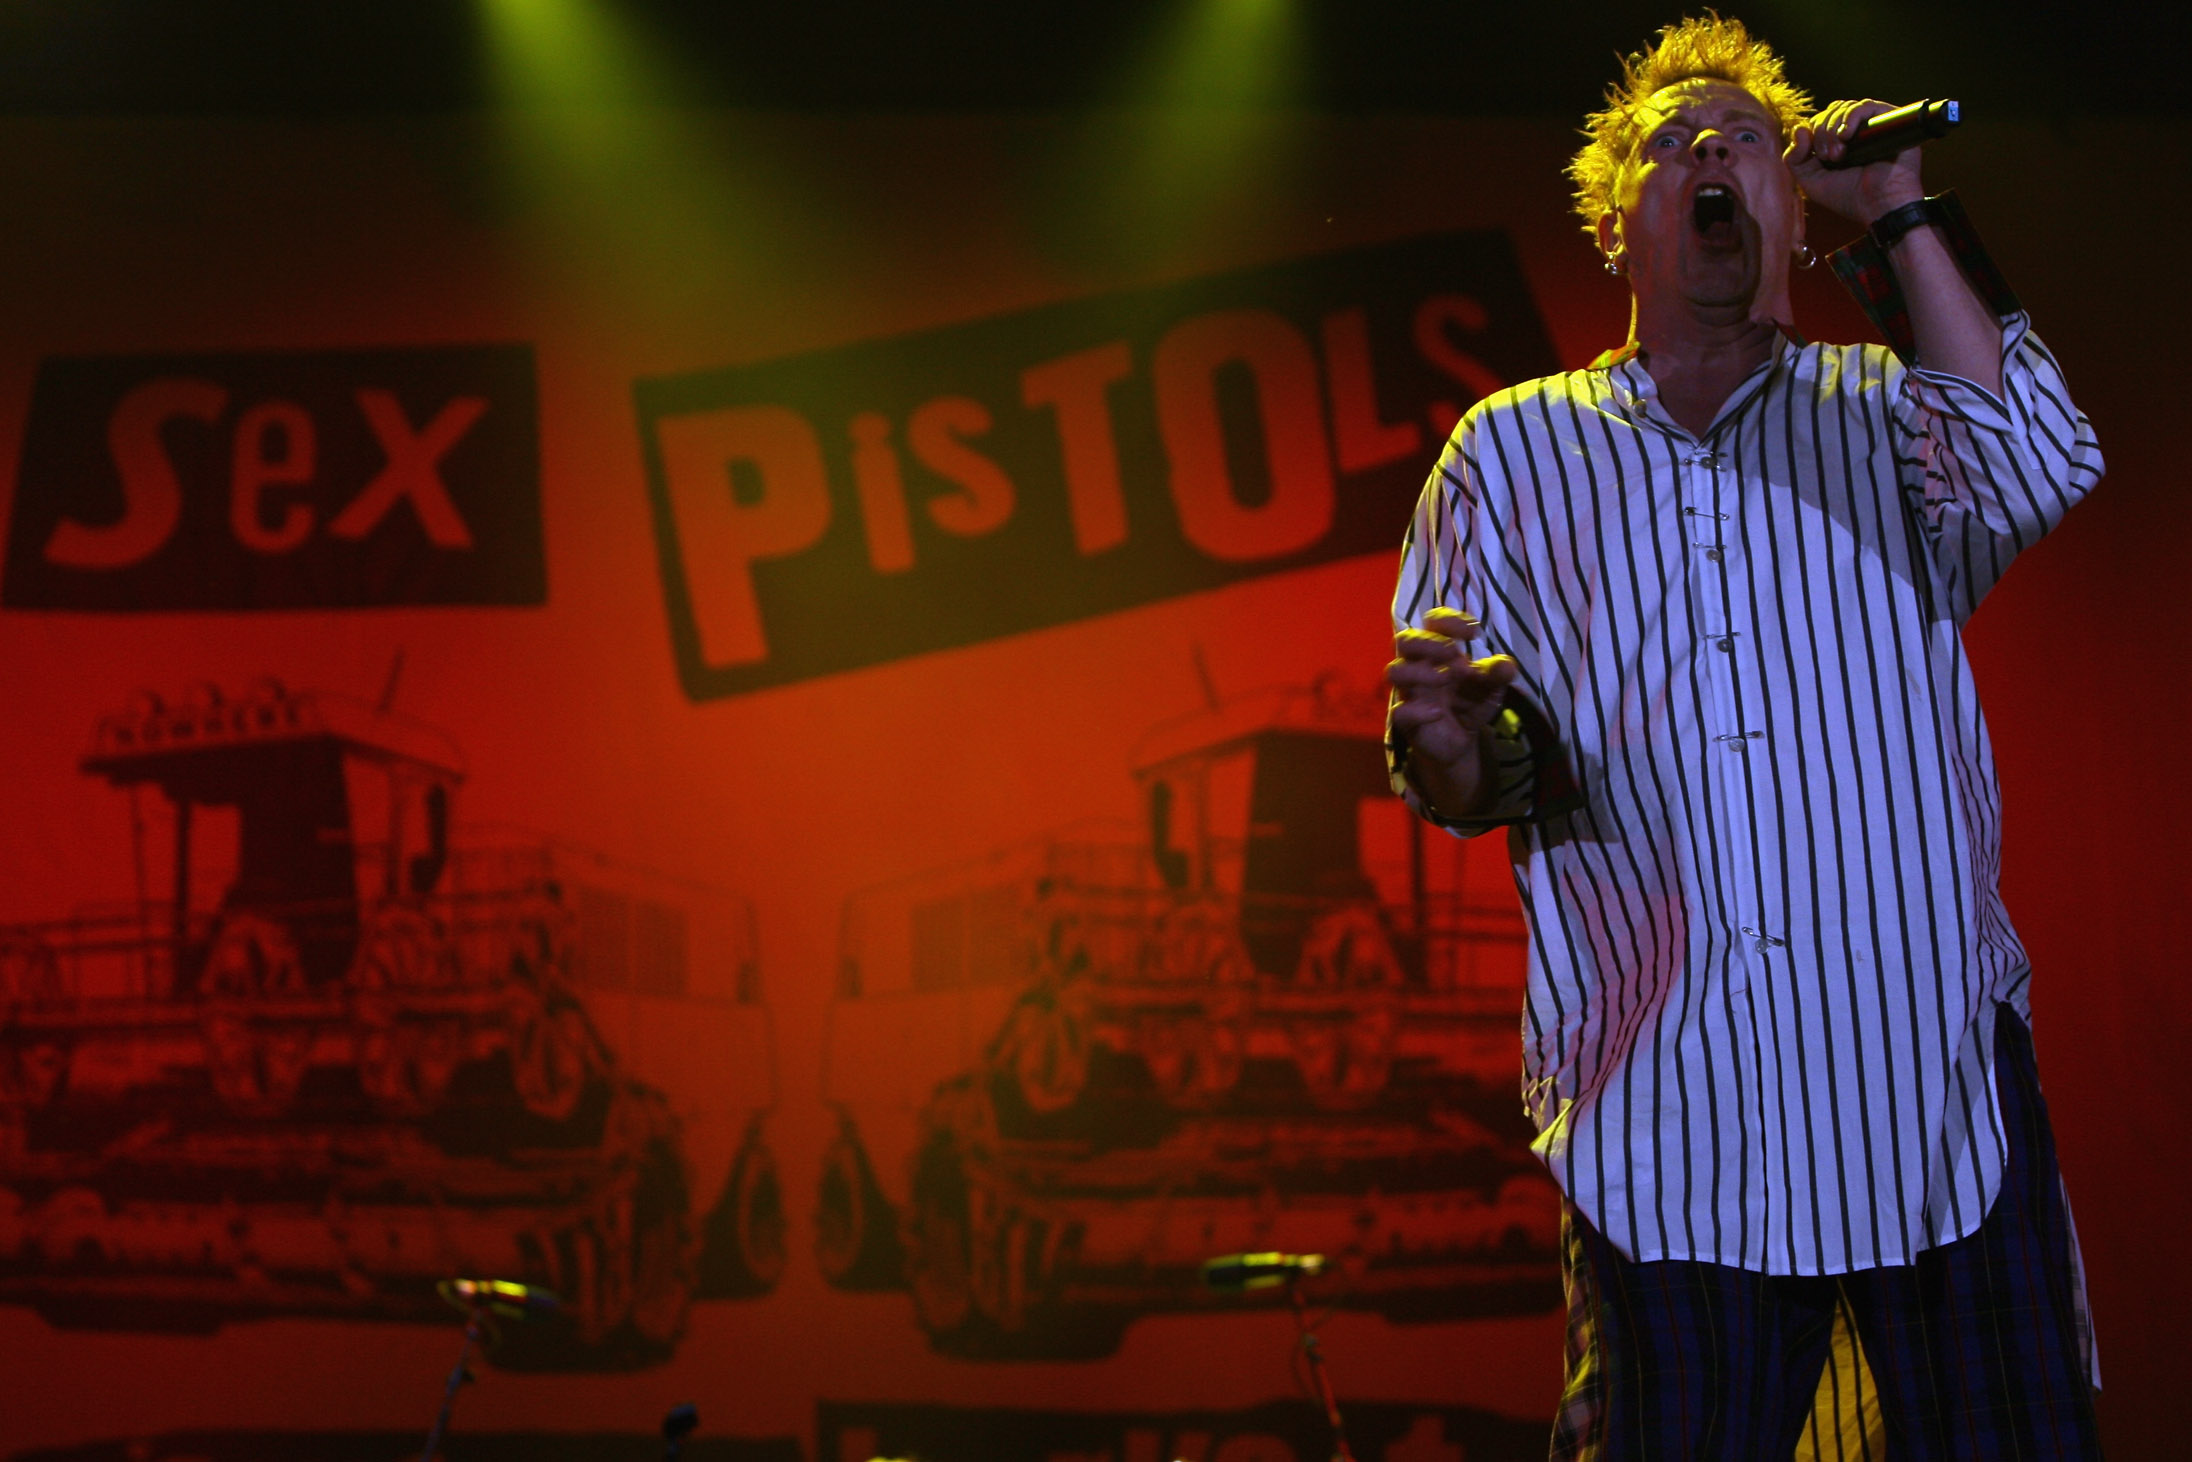 A timeline of the Sex Pistols' manic live shows